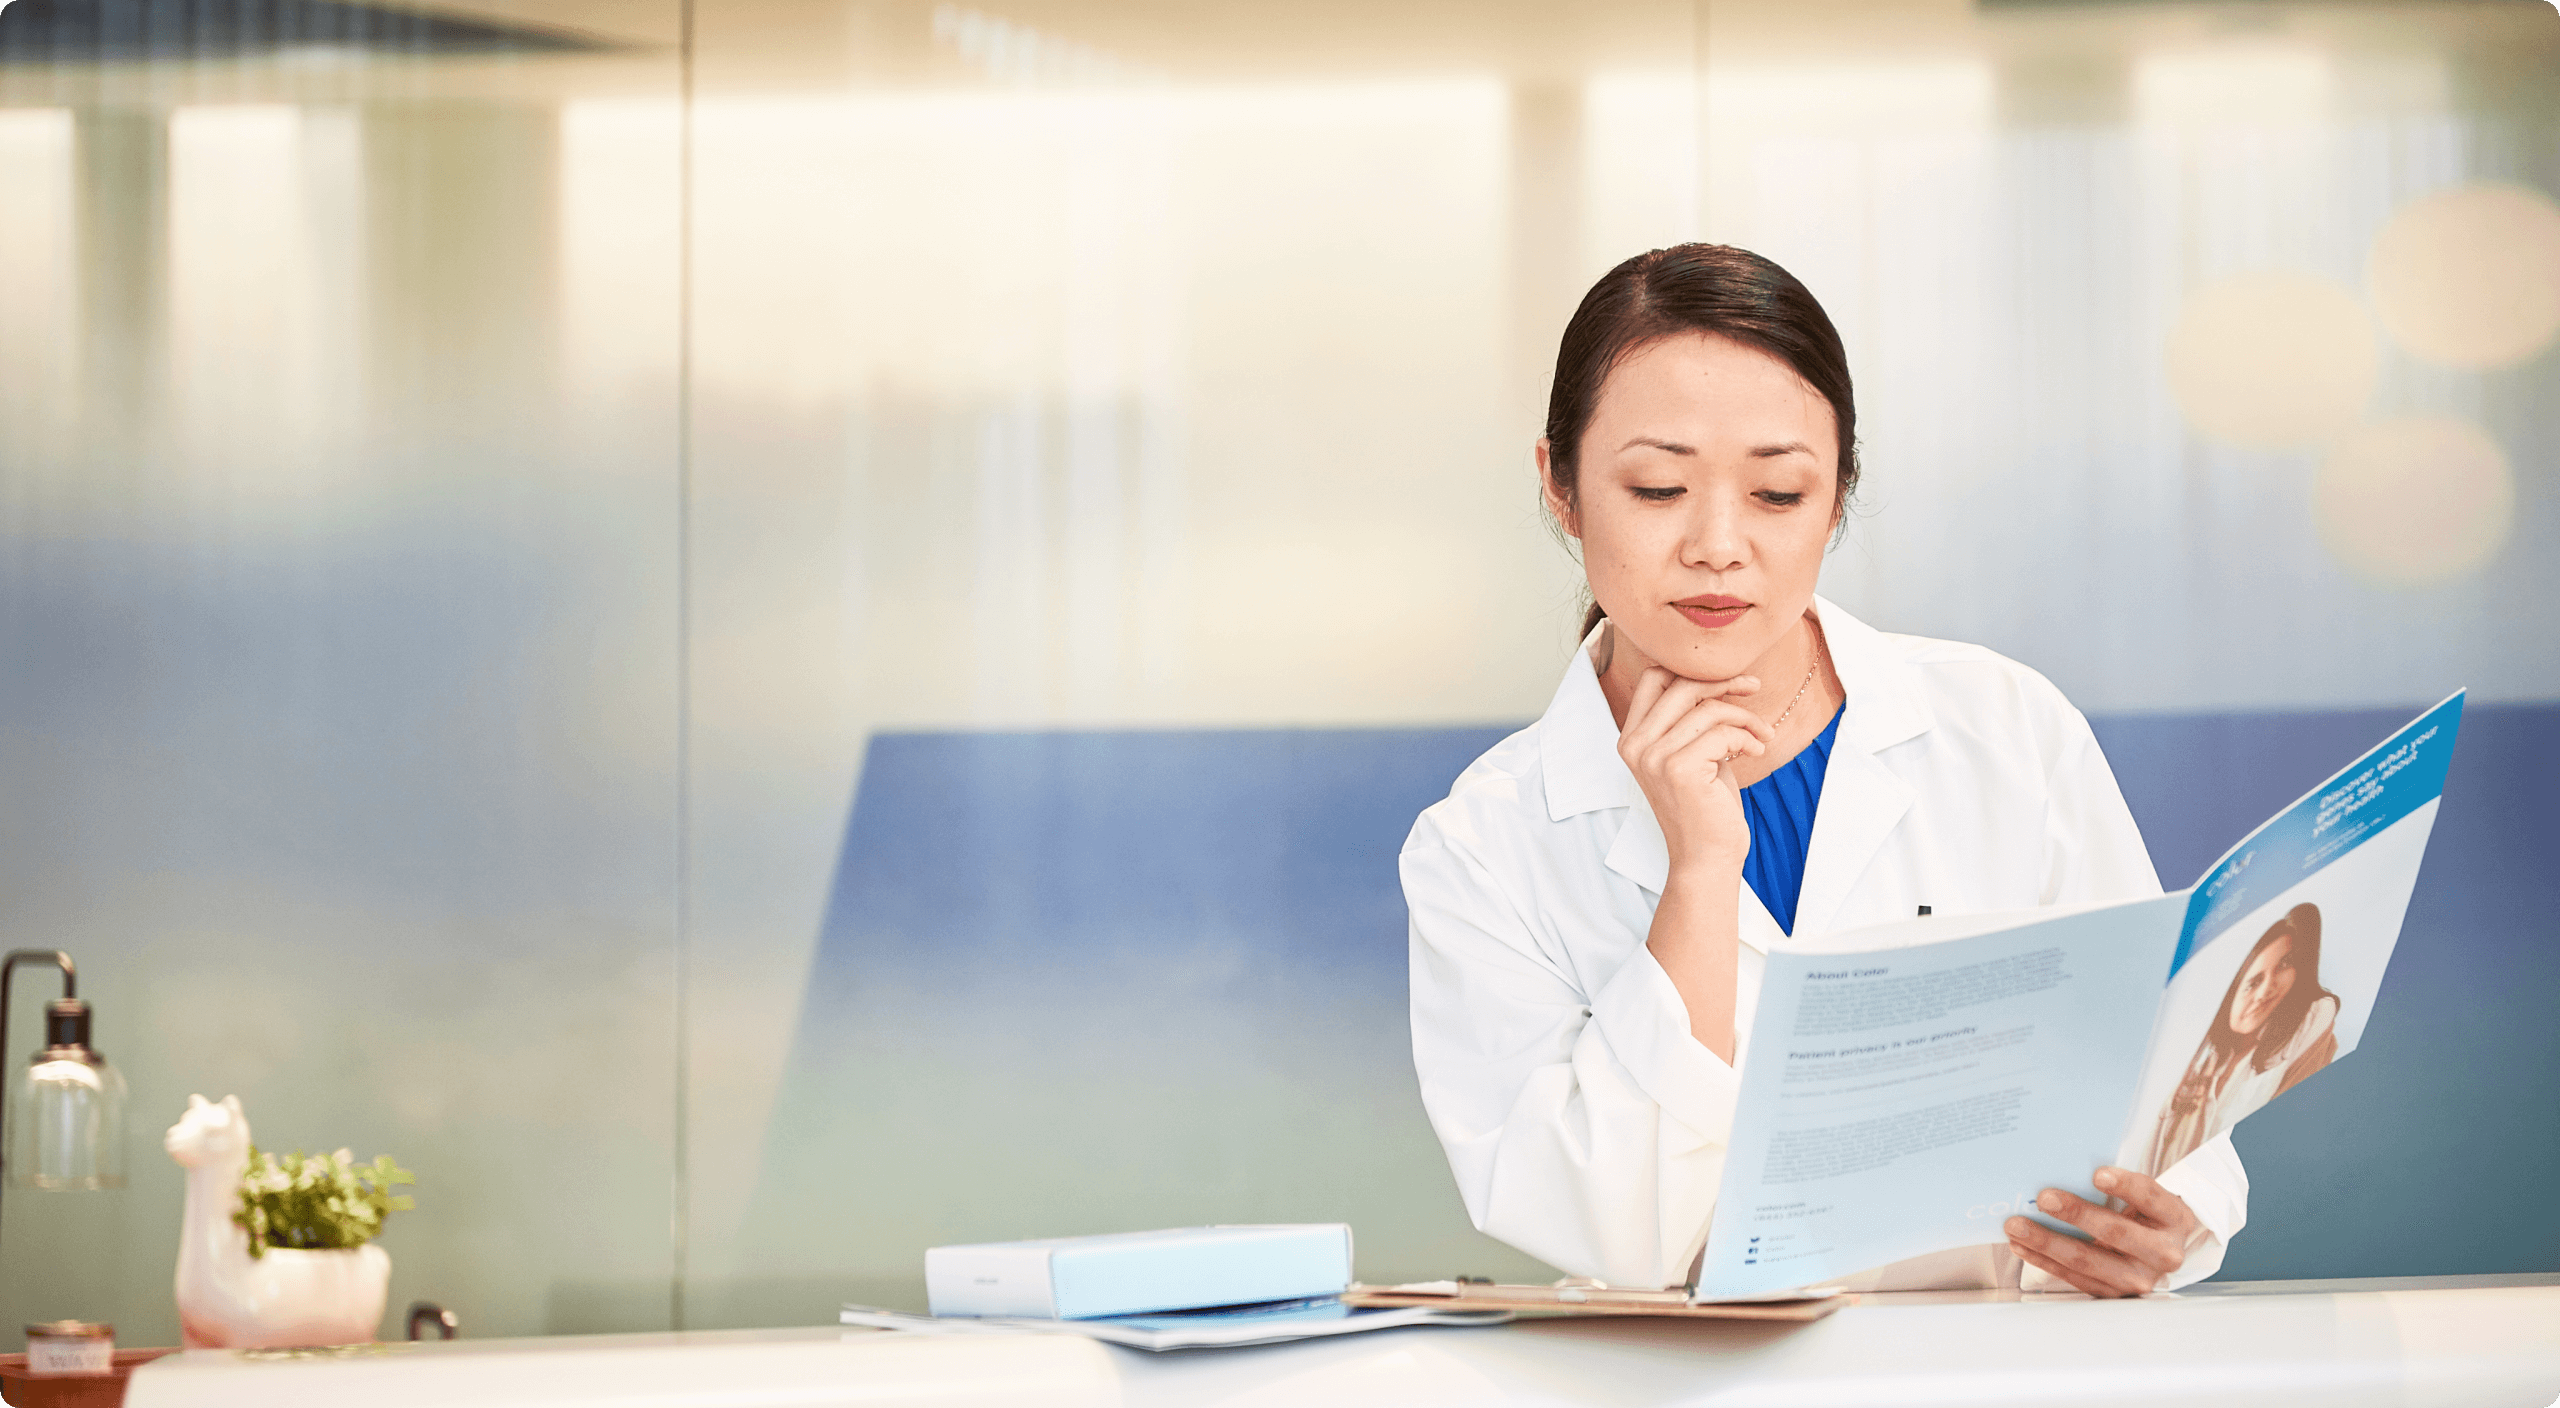 Woman wearing a lab coat sitting in an office looking at a Color brochure